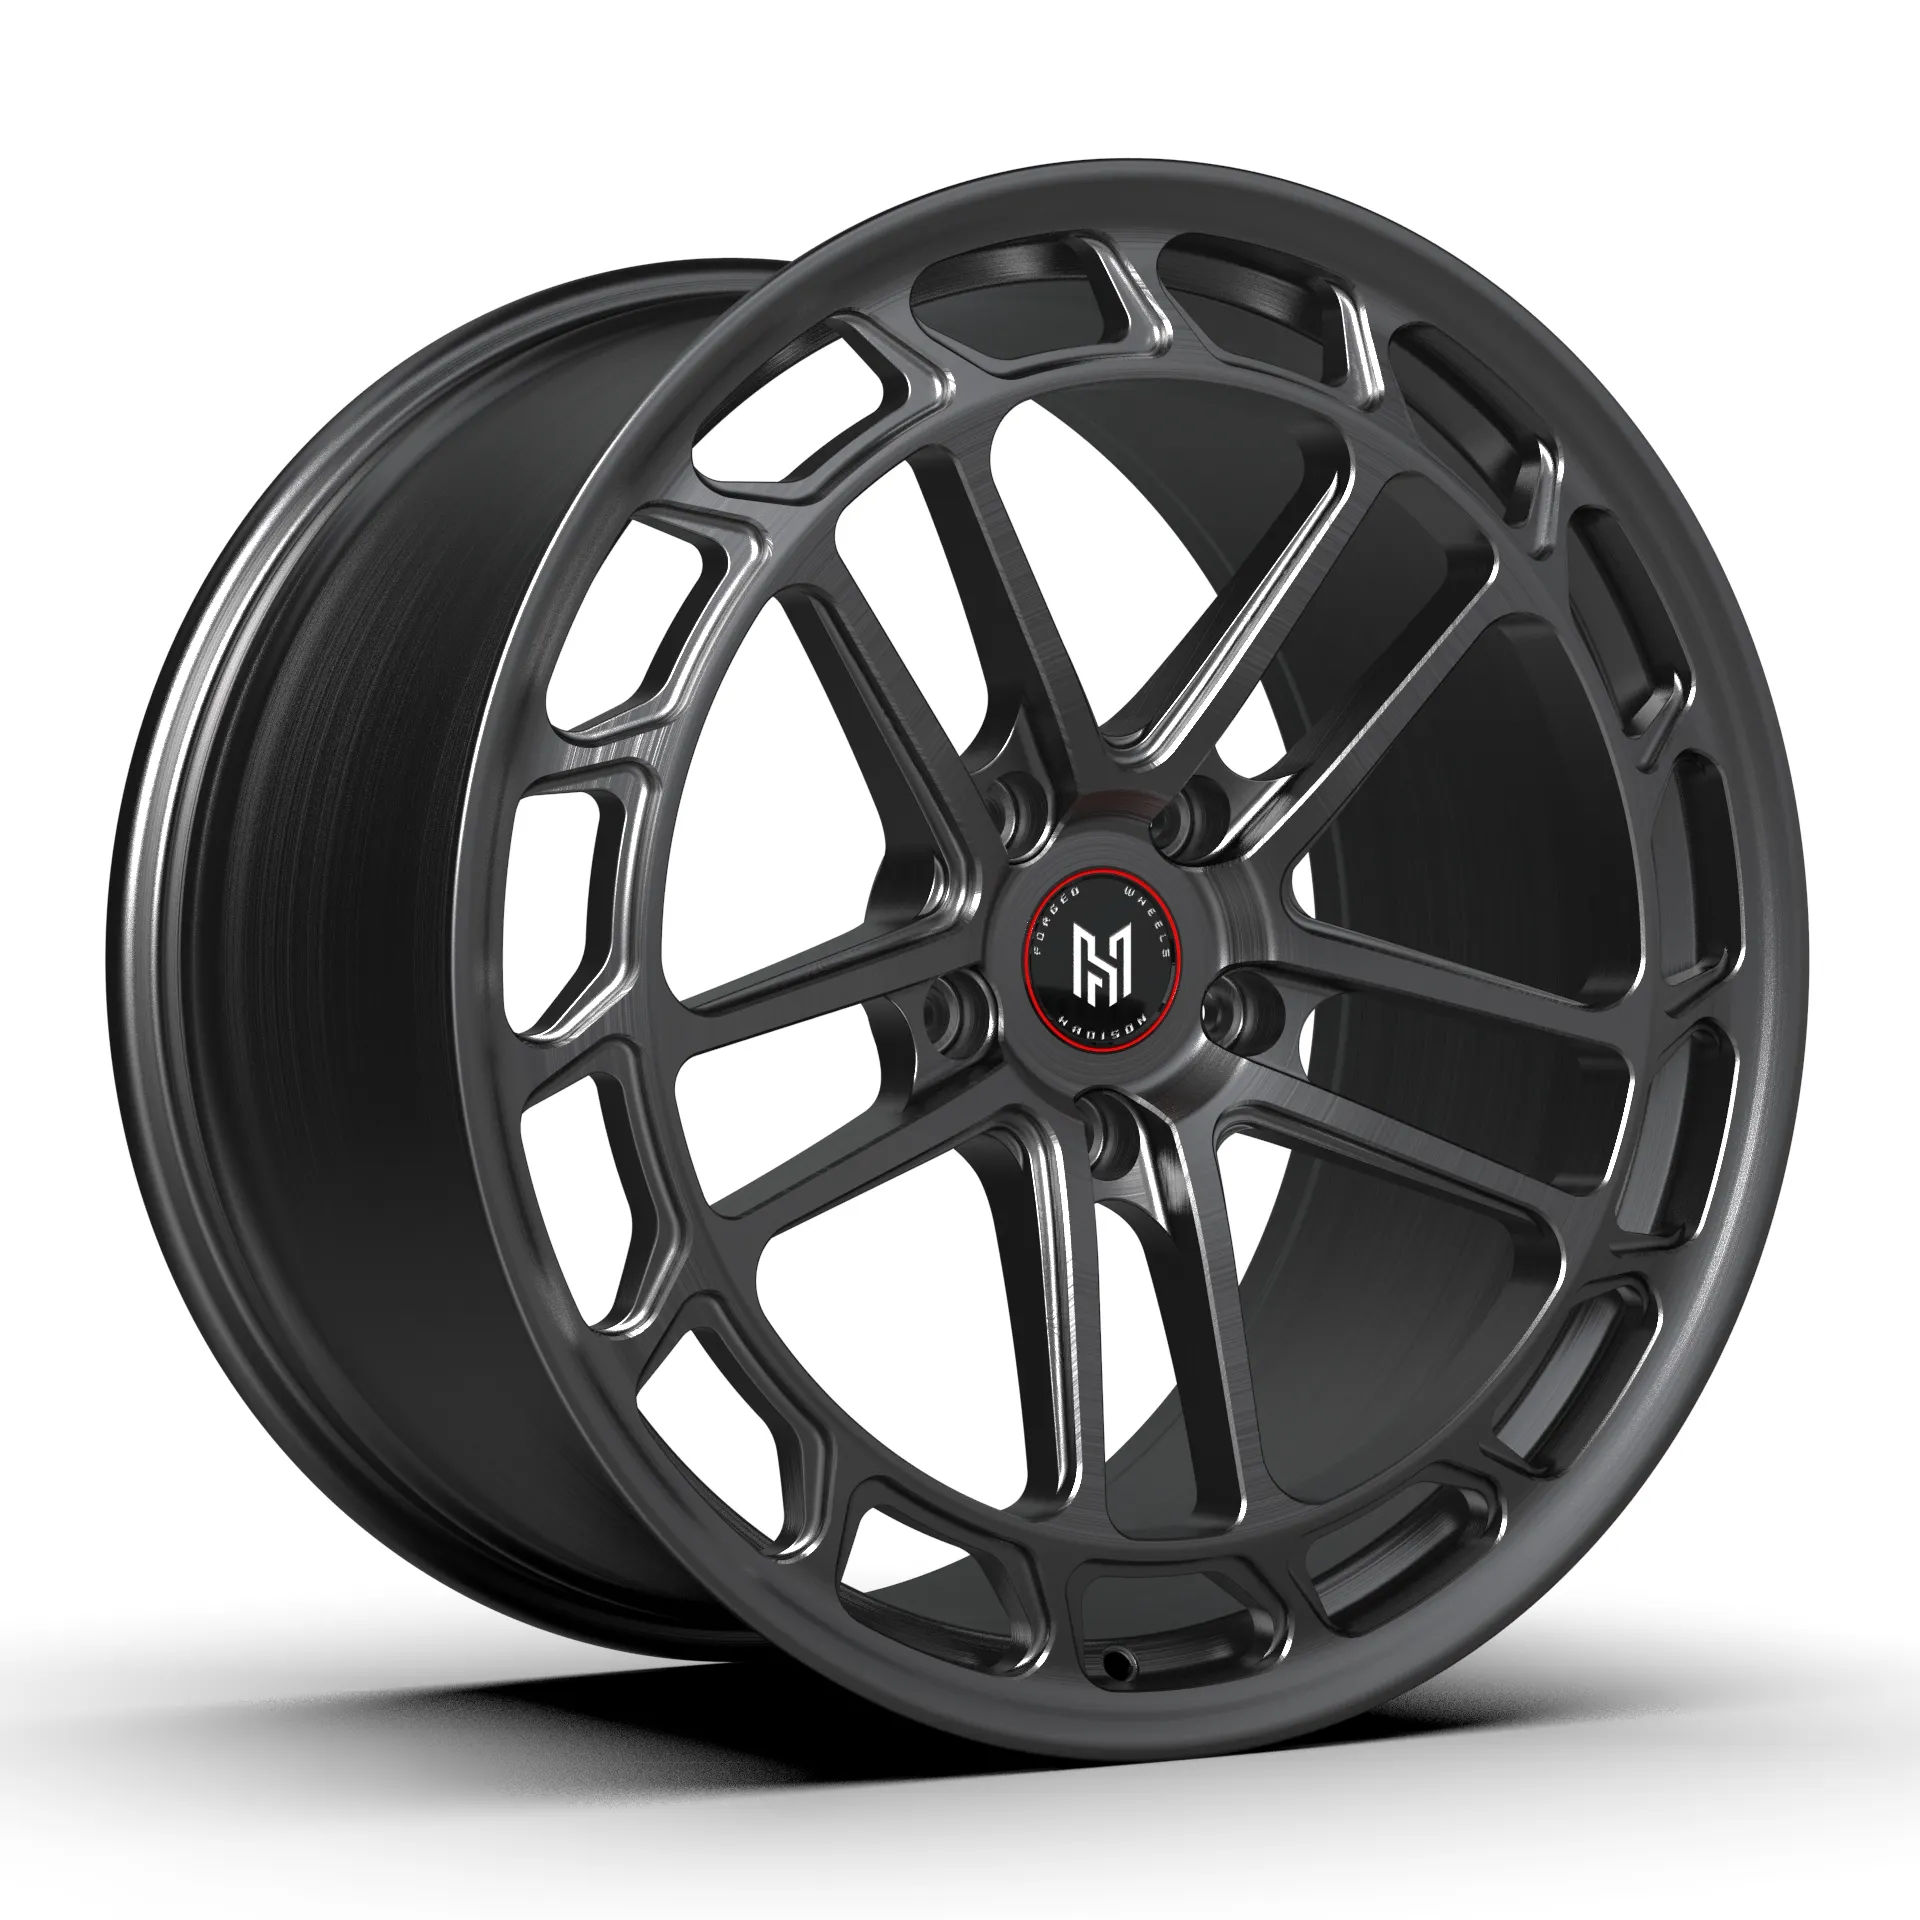 HADISON HD1111-2 Customized Full Size Forged Aluminum Alloy/Magnesium Alloy/Carbon Fiber Wheels For Vossen LC2-C1